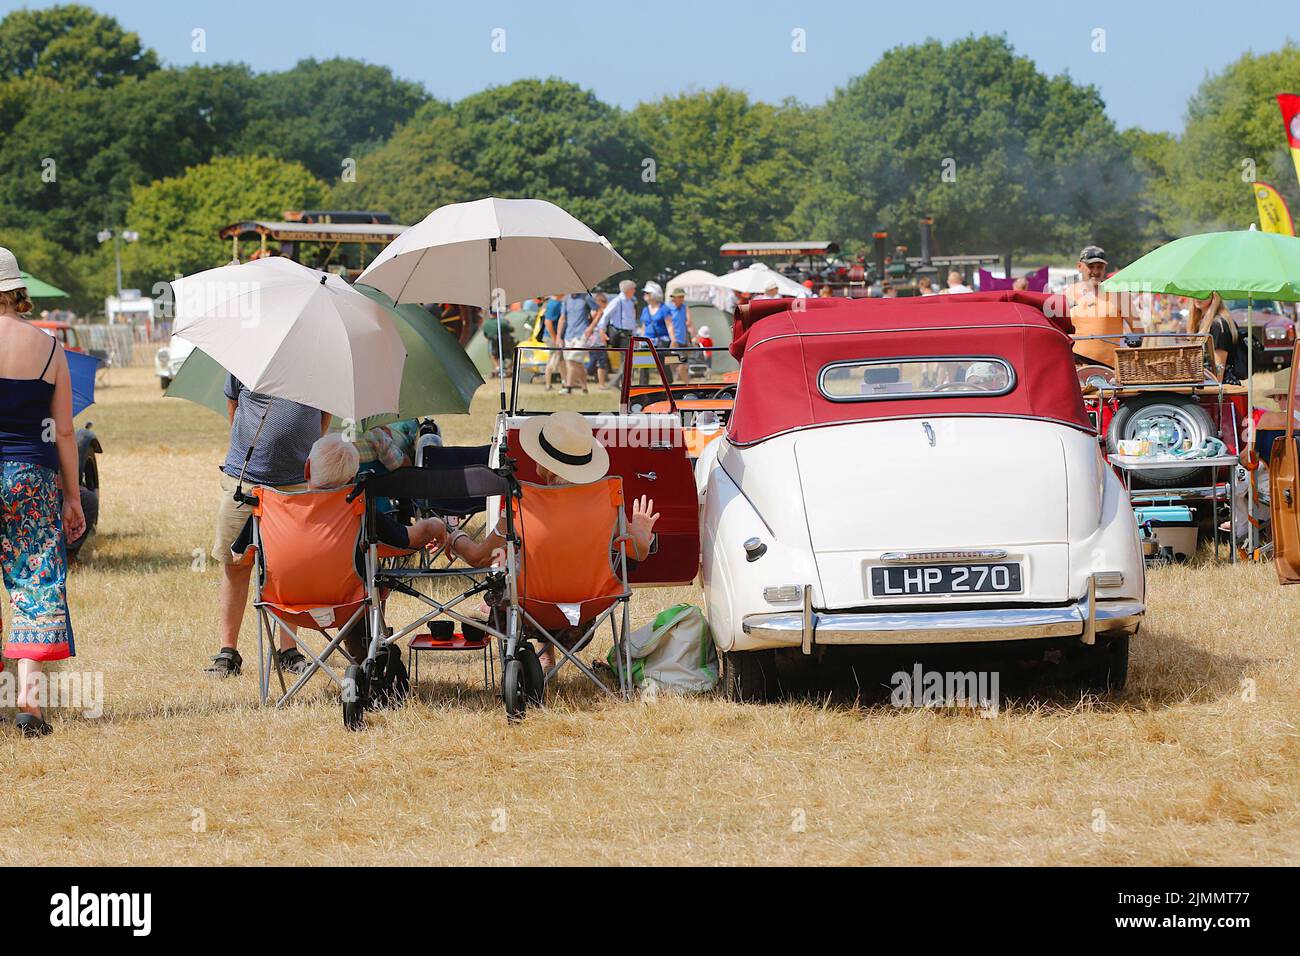 Woodchurch, Kent, UK. 07 August, 2022. On a hot and sunny day in the Kent countryside thousands of people arrive at one of the largest steam rally events in the south east. An elderly couple relax under sunshade by their Sunbeam Talbot. Photo Credit: Paul Lawrenson/Alamy Live News Stock Photo